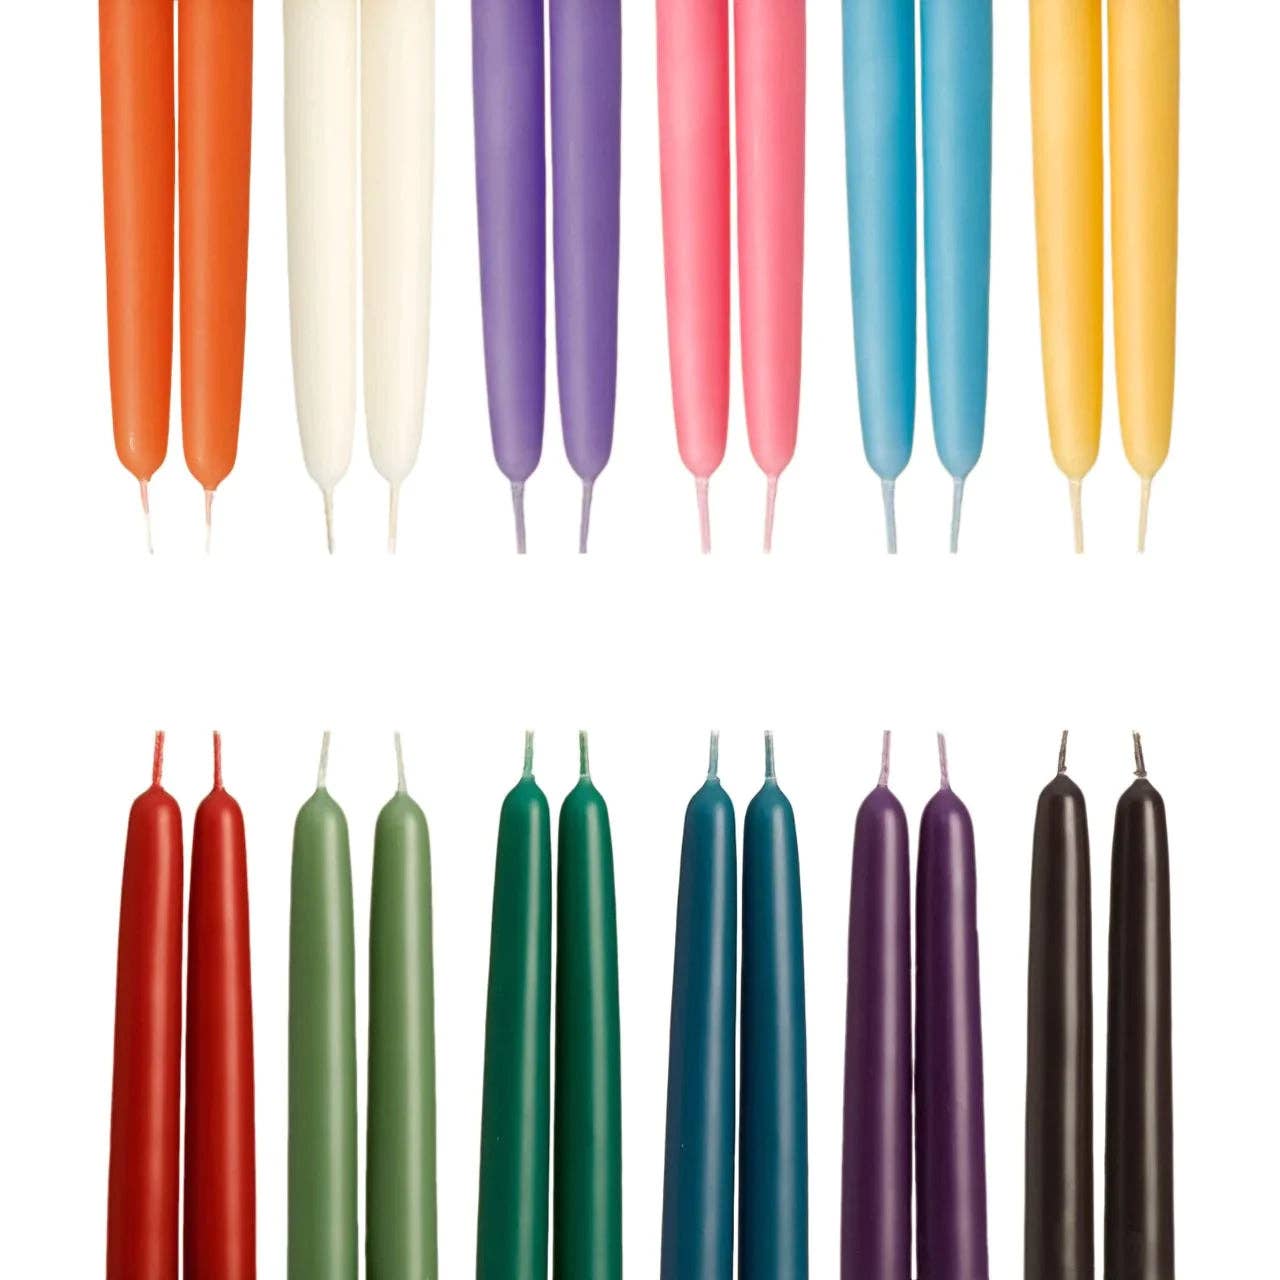 100% Pure Beeswax Taper Candles